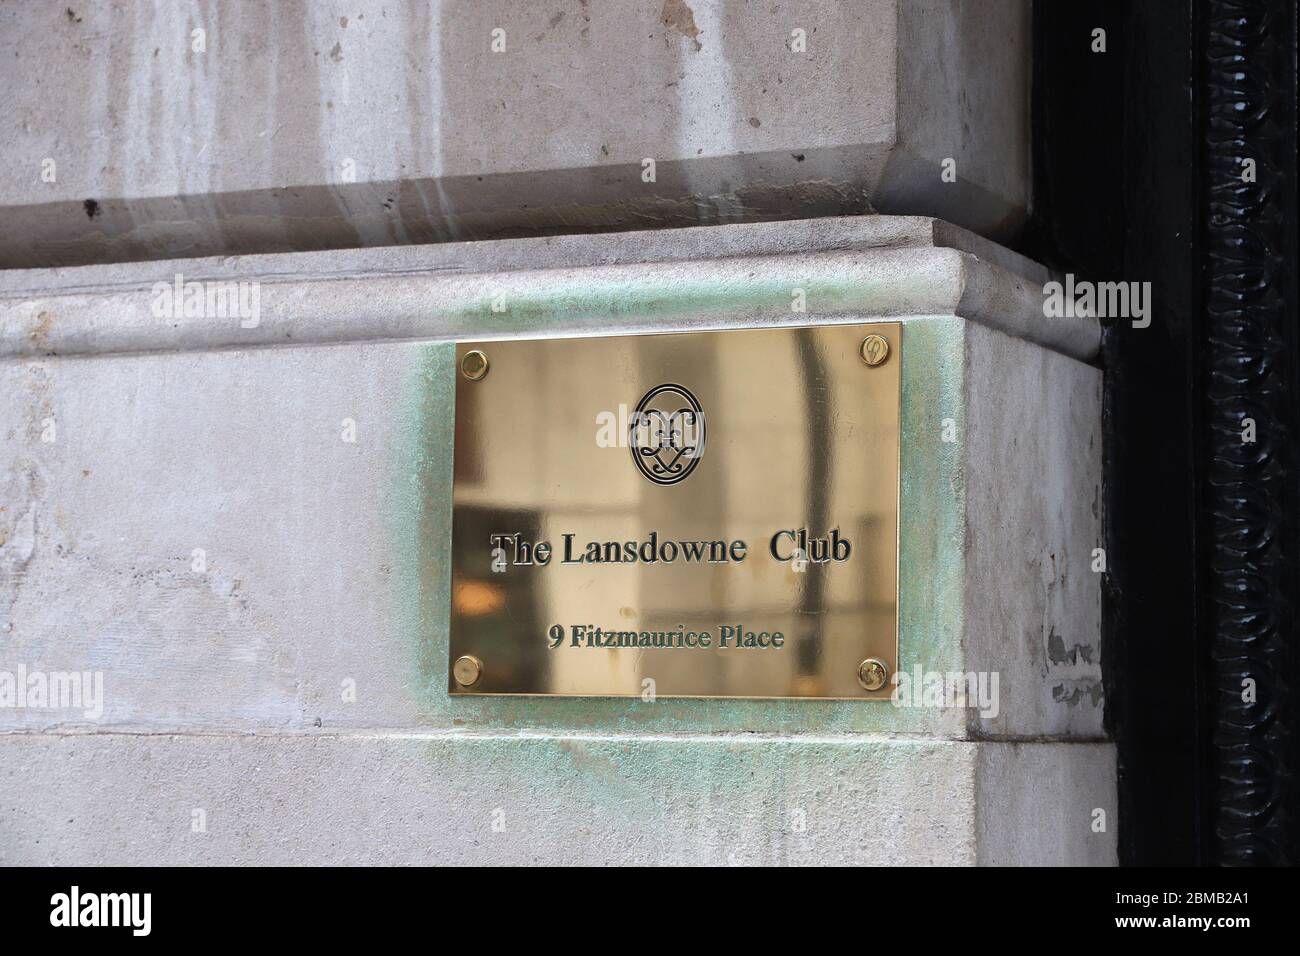 LONDON, UK - JULY 15, 2019: The Lansdowne Club in Mayfair district, London. It's one of London's gentlemen's clubs, private social clubs typical for B Stock Photo